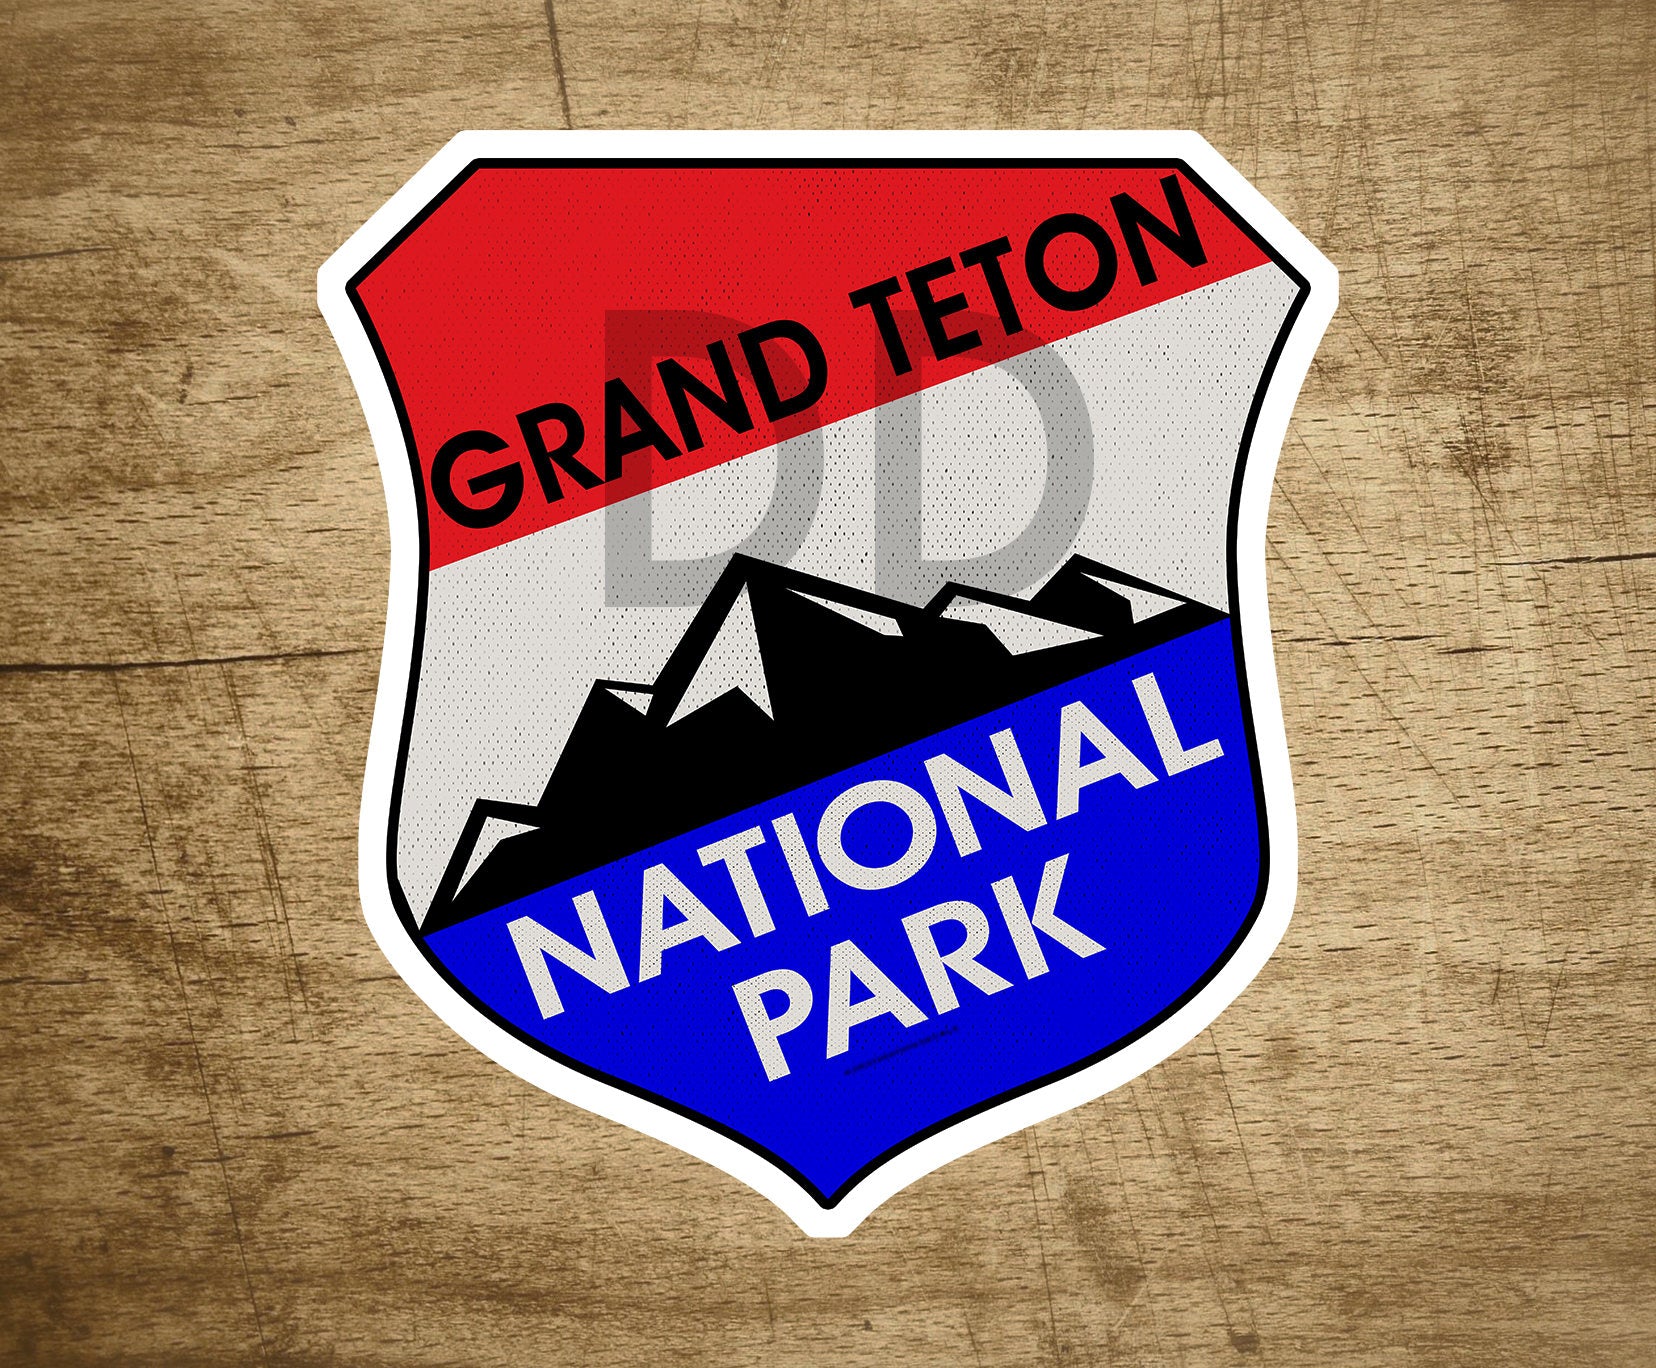 GRAND TETON National Park Wyoming Mountains Sticker Decal 3.3" x 3" Decals Stickers